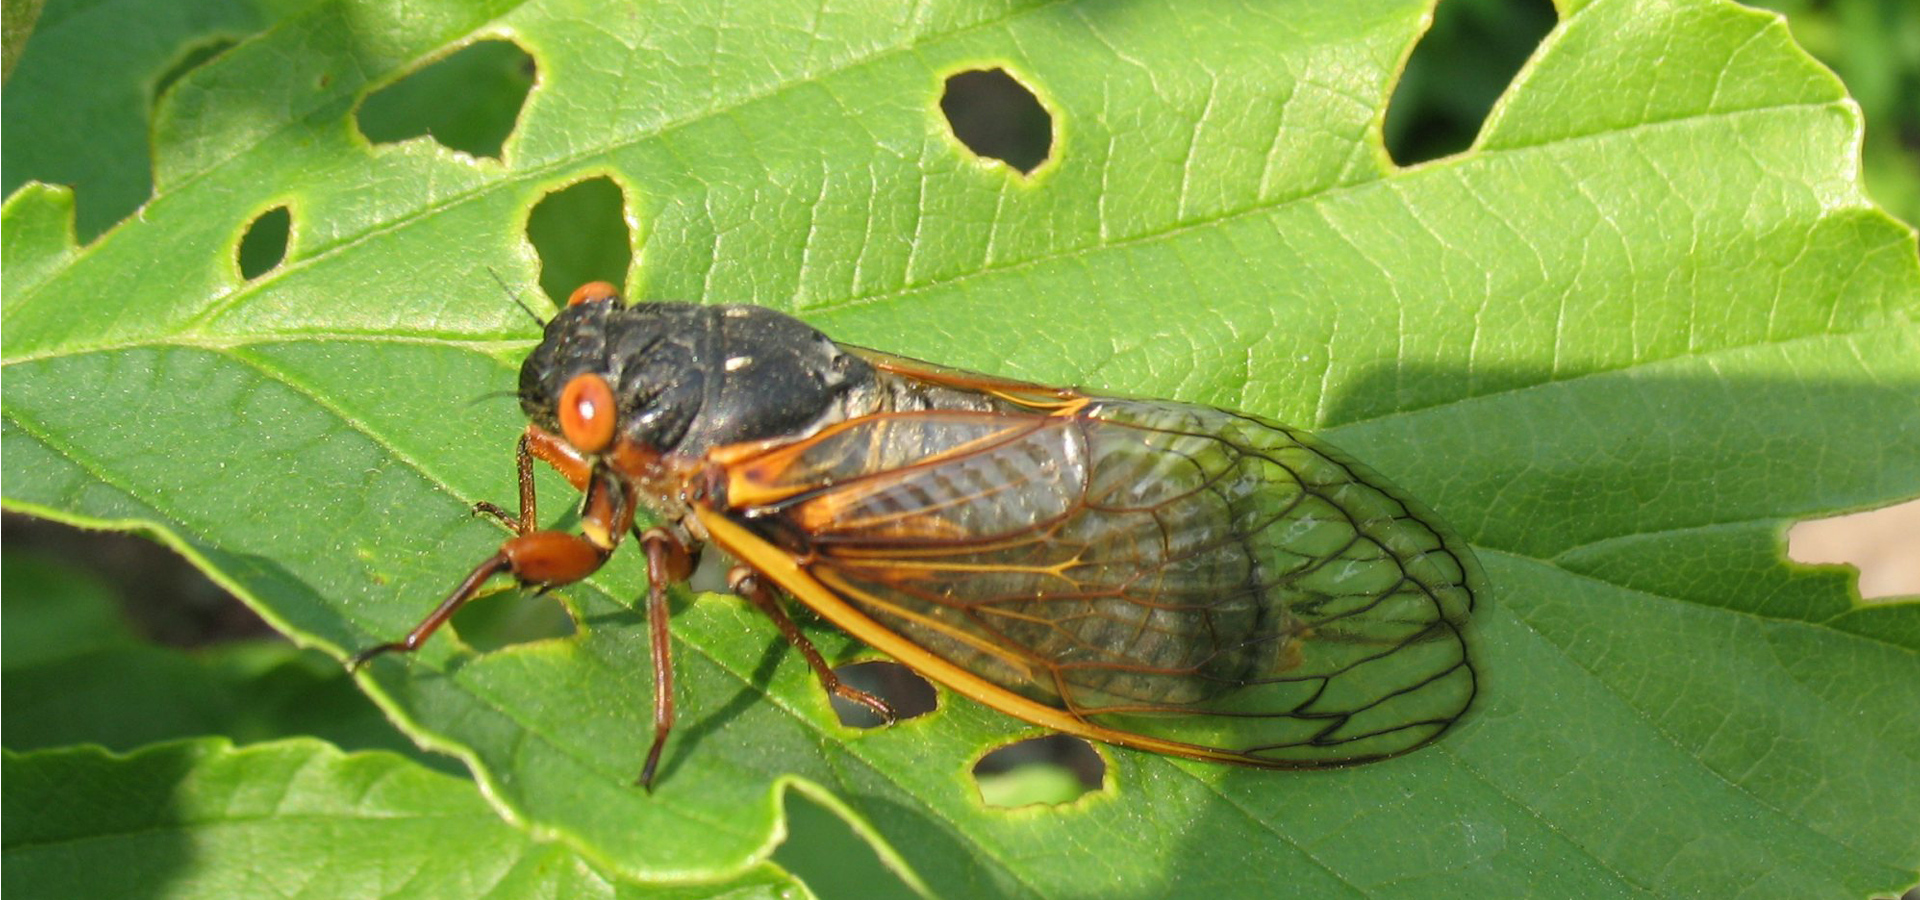 Photograph of adult periodical cicada on leaf